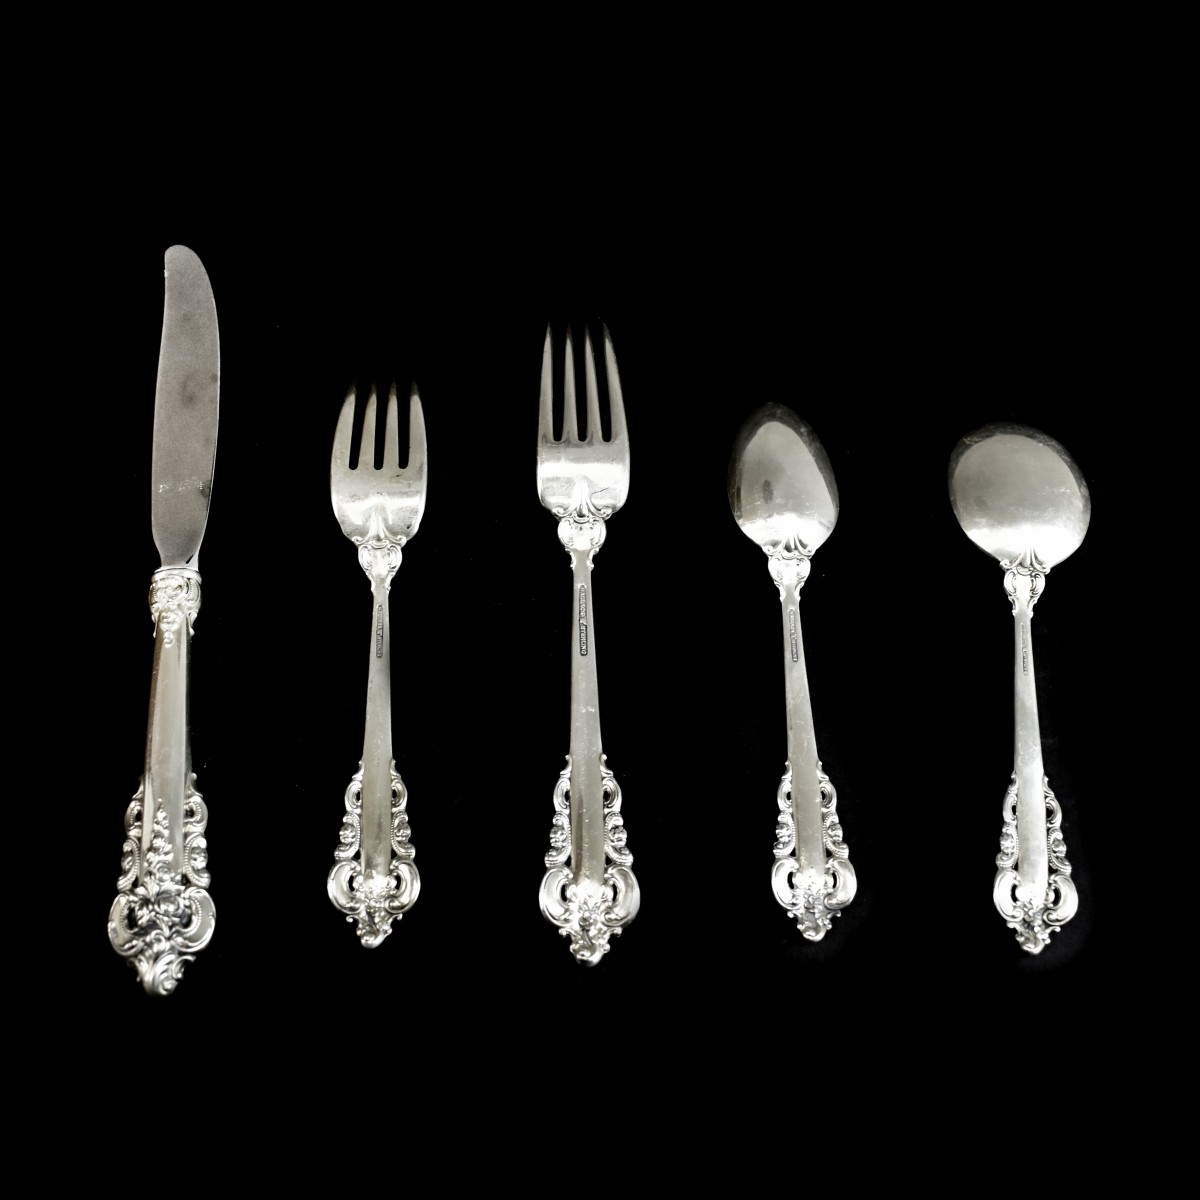 Wallace "Grand Baroque" Sterling Flatware Set